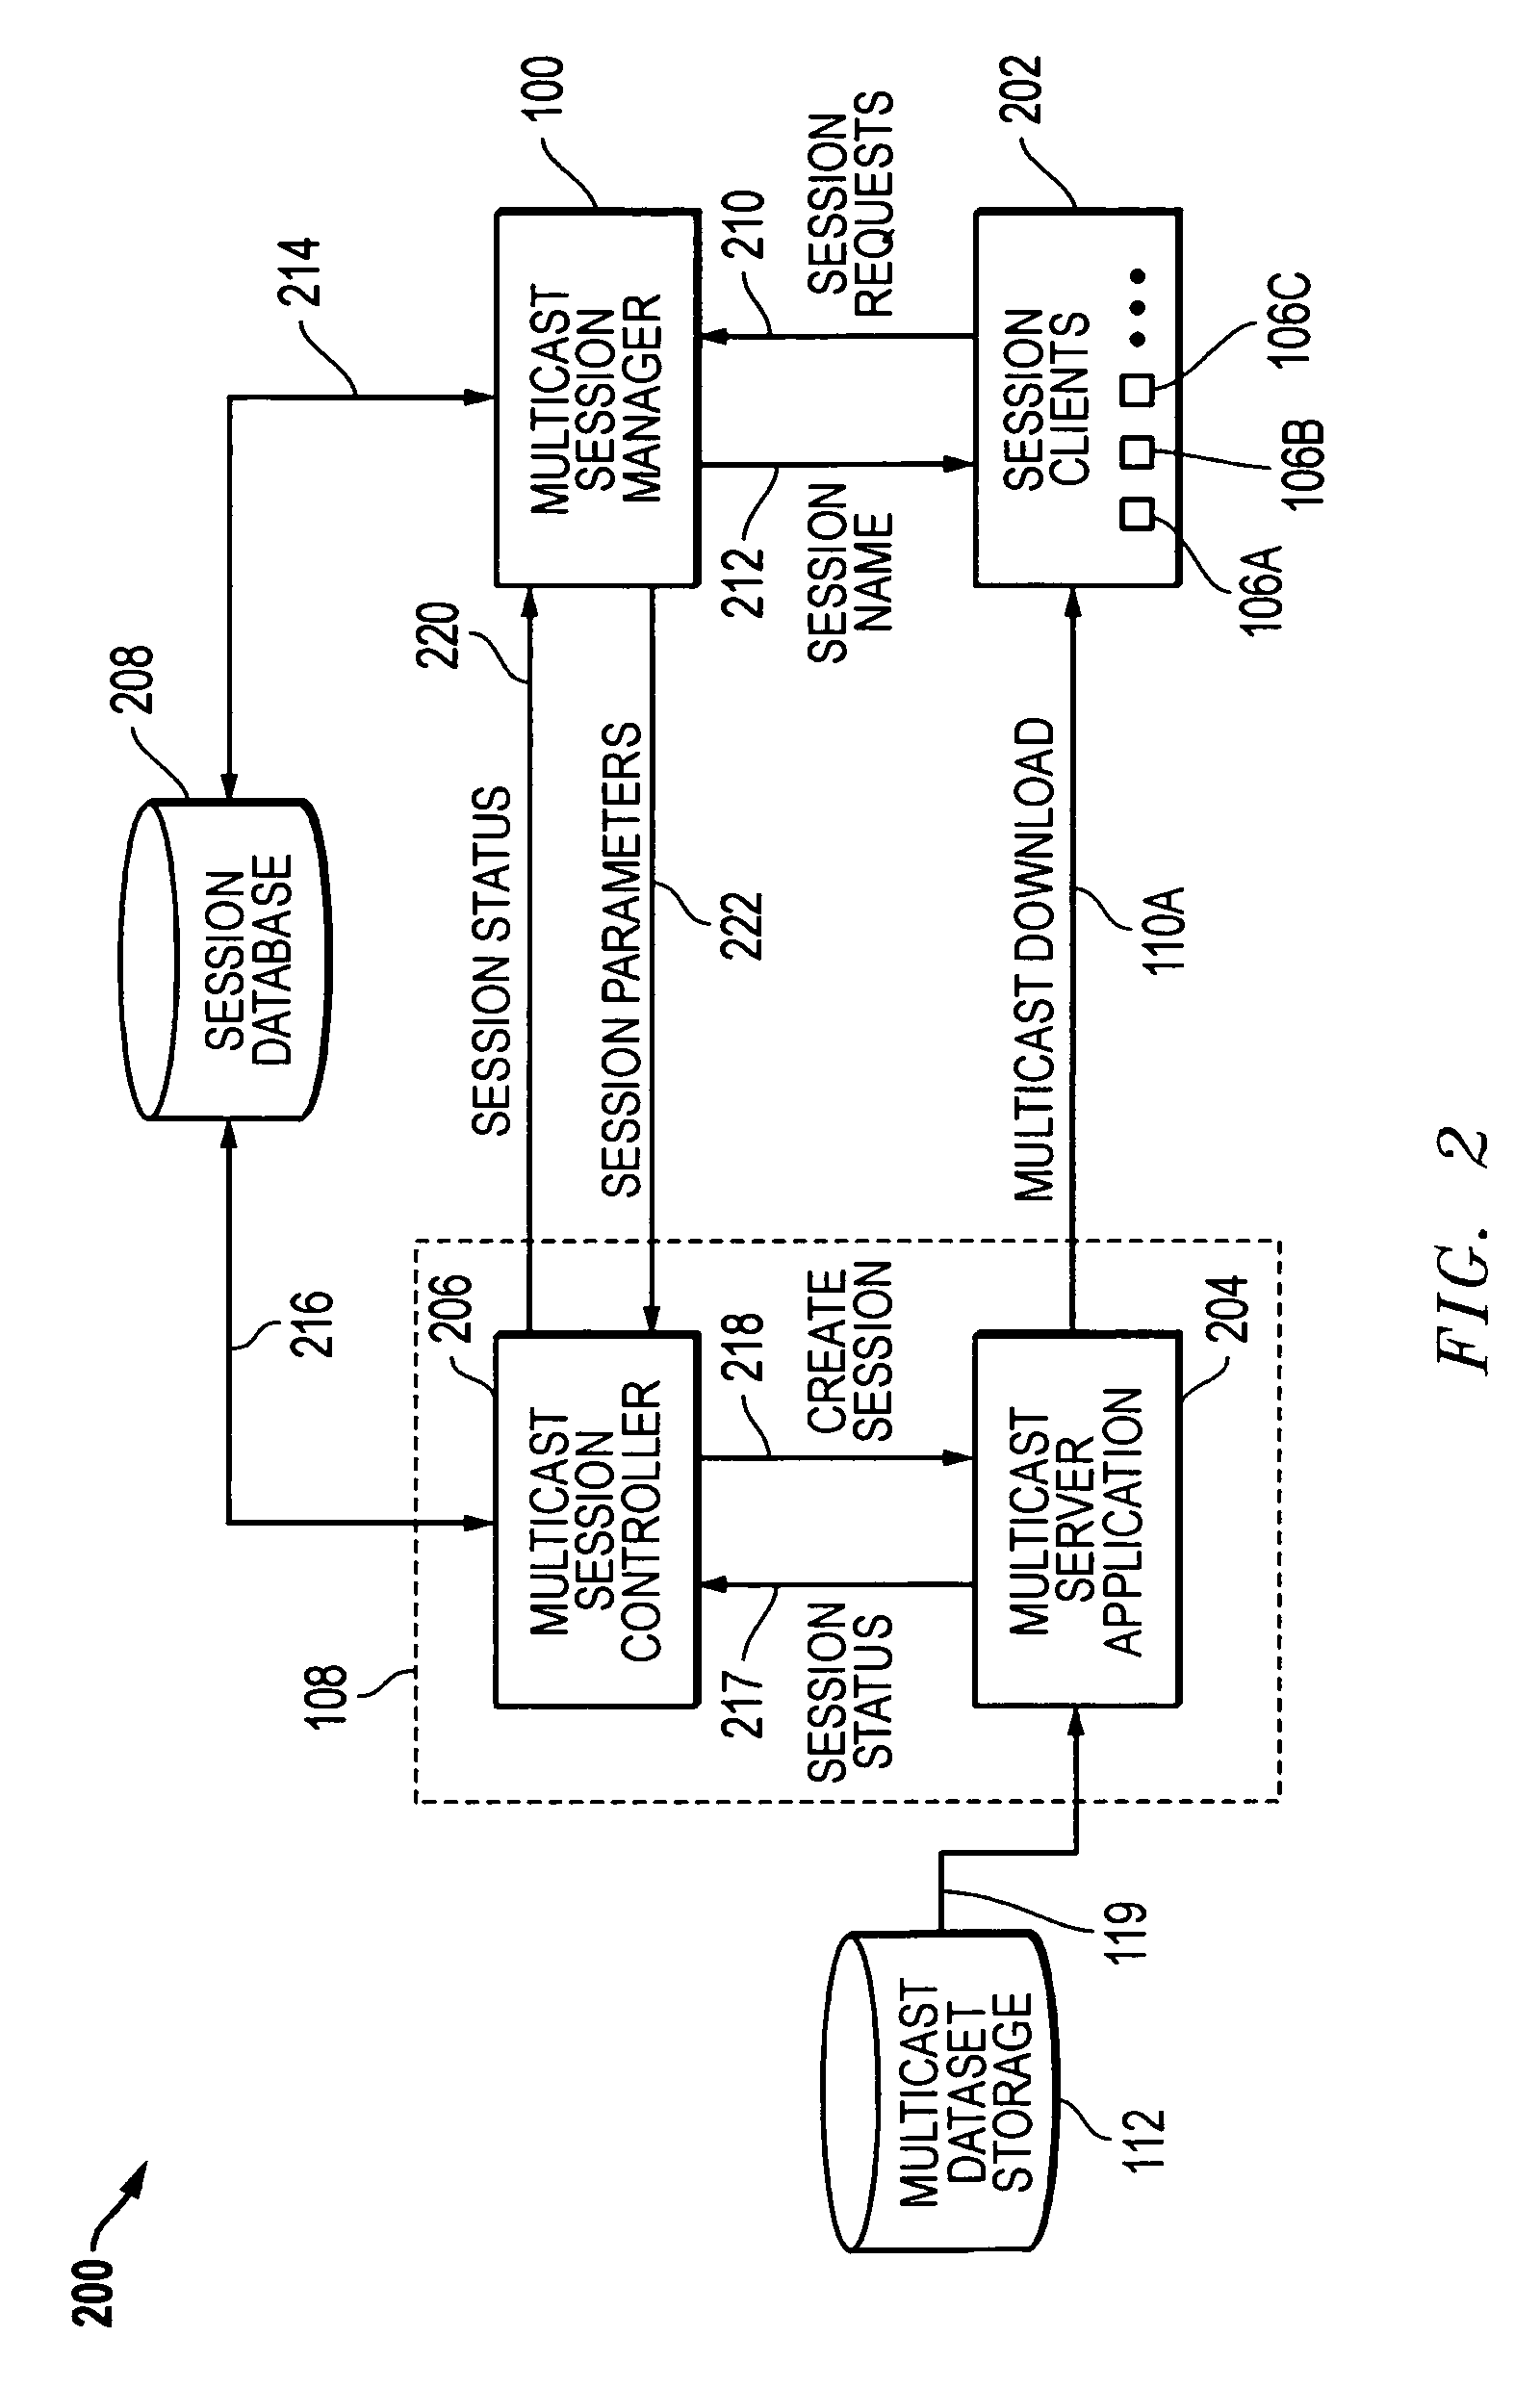 Method for dynamically managing multicast sessions for software downloads and related systems